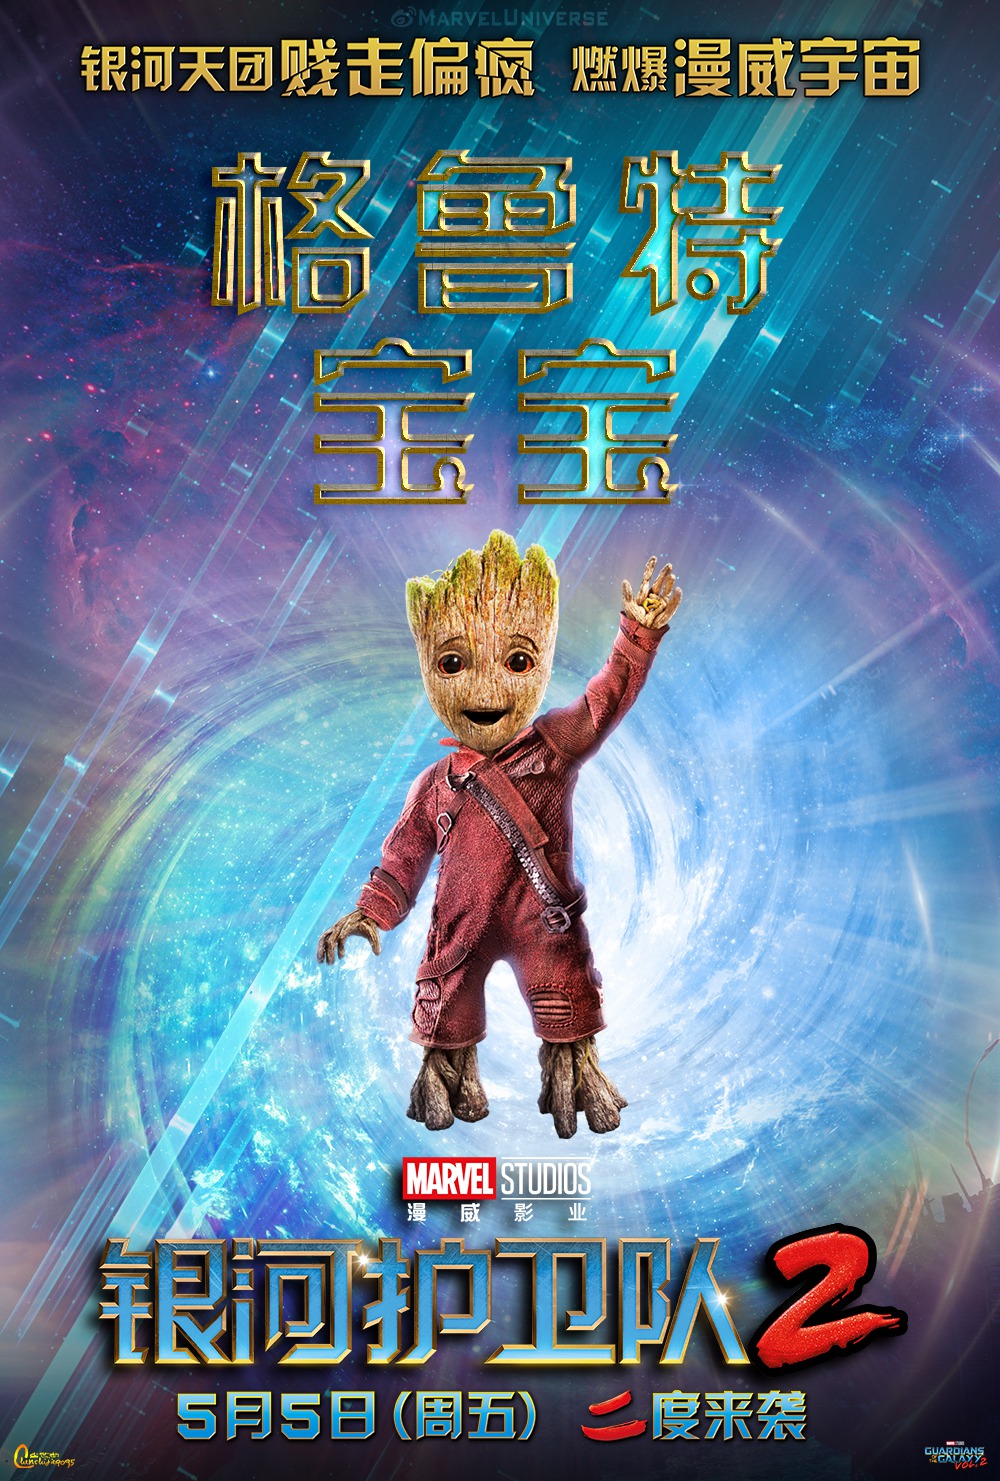 Extra Large Movie Poster Image for Guardians of the Galaxy Vol. 2 (#40 of 45)